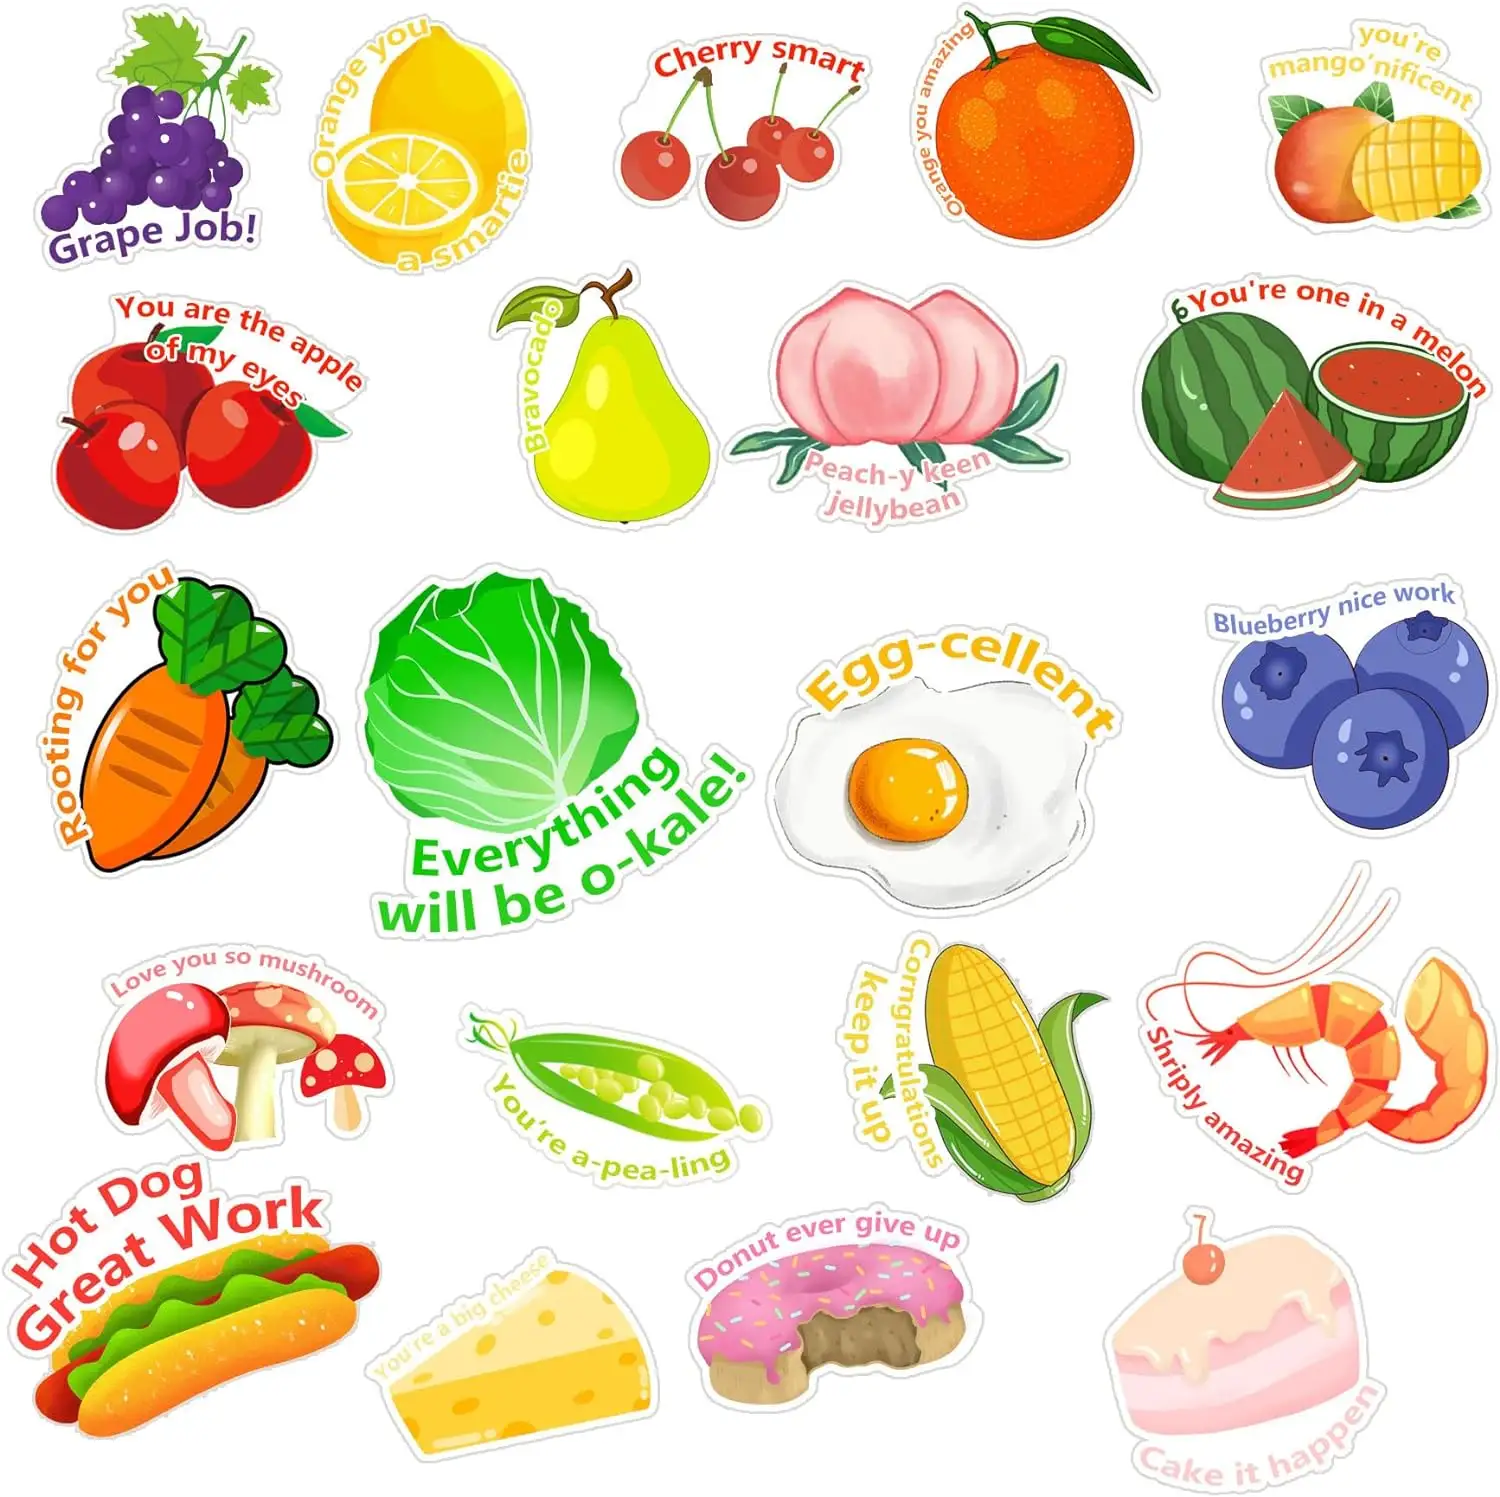 Fruits and Food Thick Gel Clings Window Decals Removable and Reusable Cute Encourage Vegetables Clings Stickers for Kids Adults